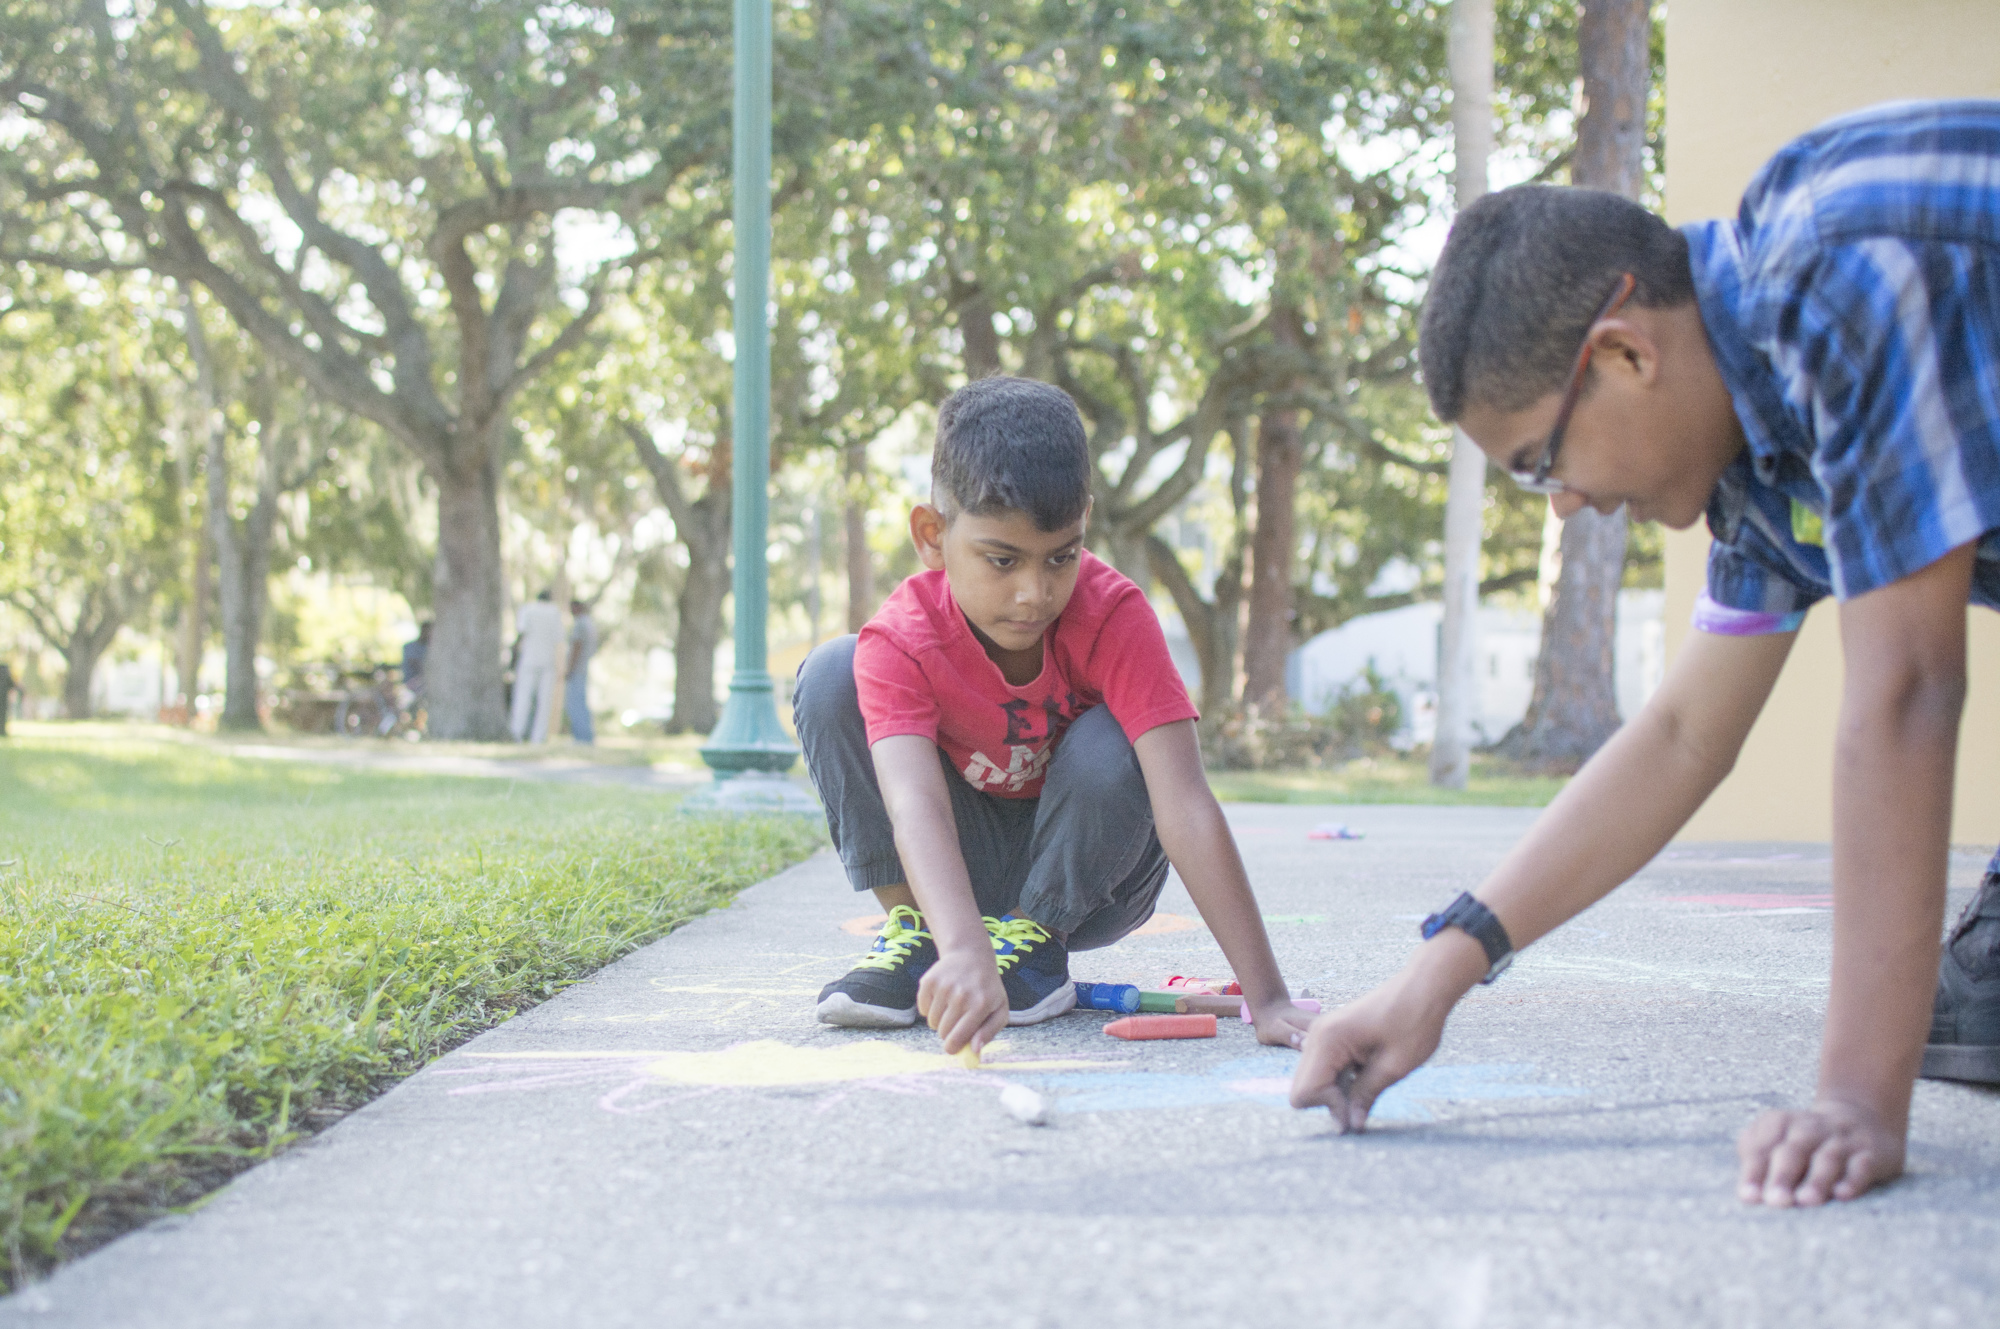 Damian Rosario draws on the side walk near the Gillespie Park pavilion during the neighborhood's celebration of its new butterfly garden.